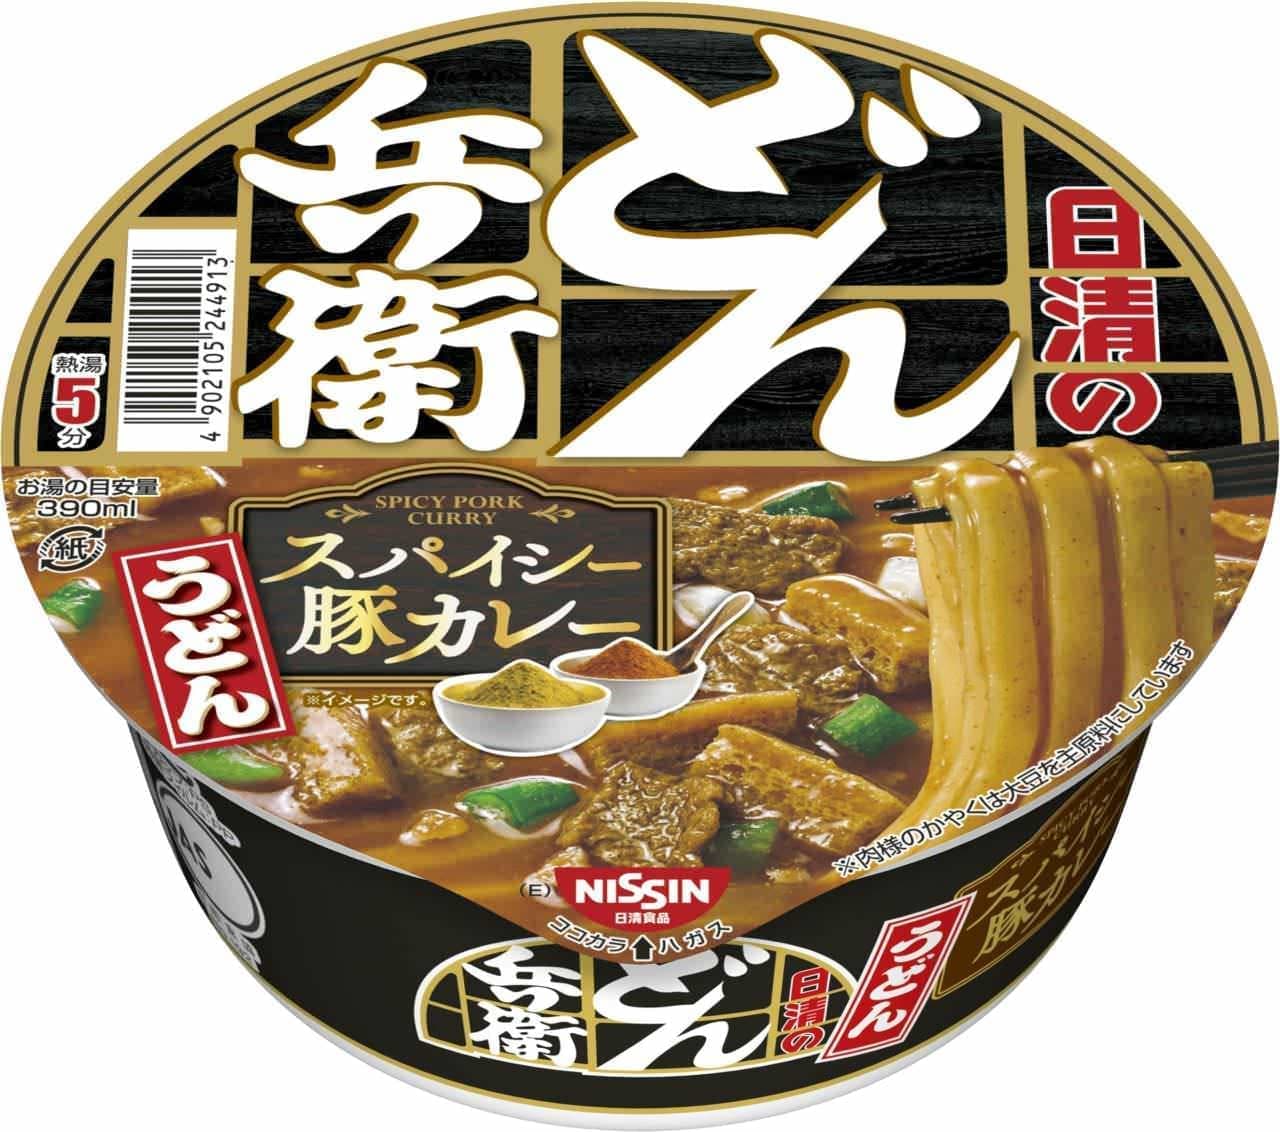 Nissin Donbei Spicy Pig Curry Udon